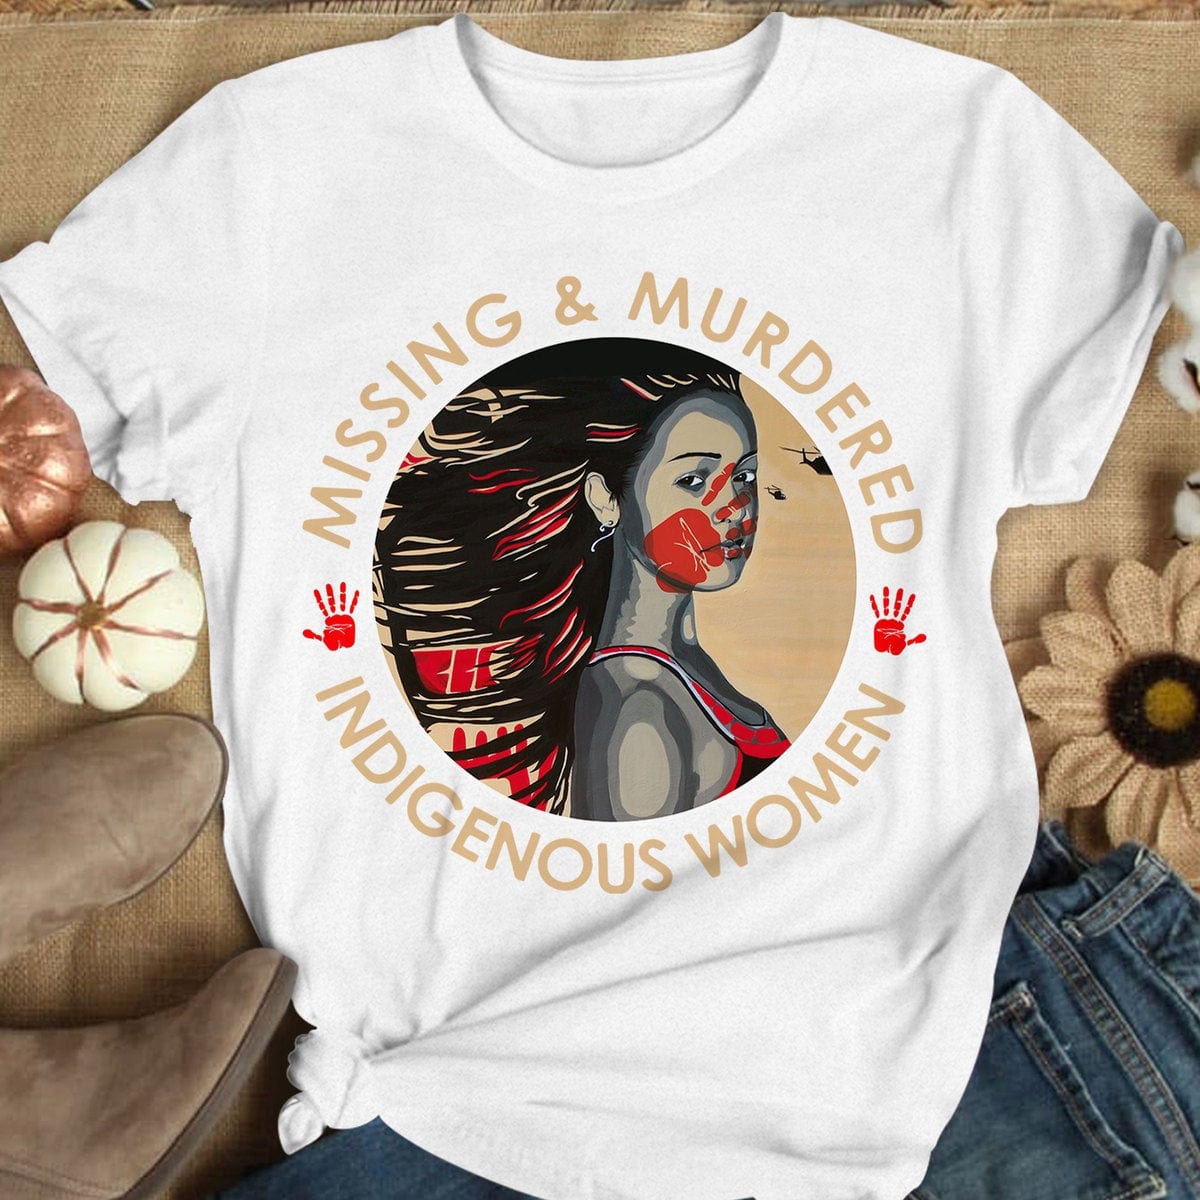 Native American Hoodie, The Original Founding Fathers, American Indian T  Shirts - Hope Fight